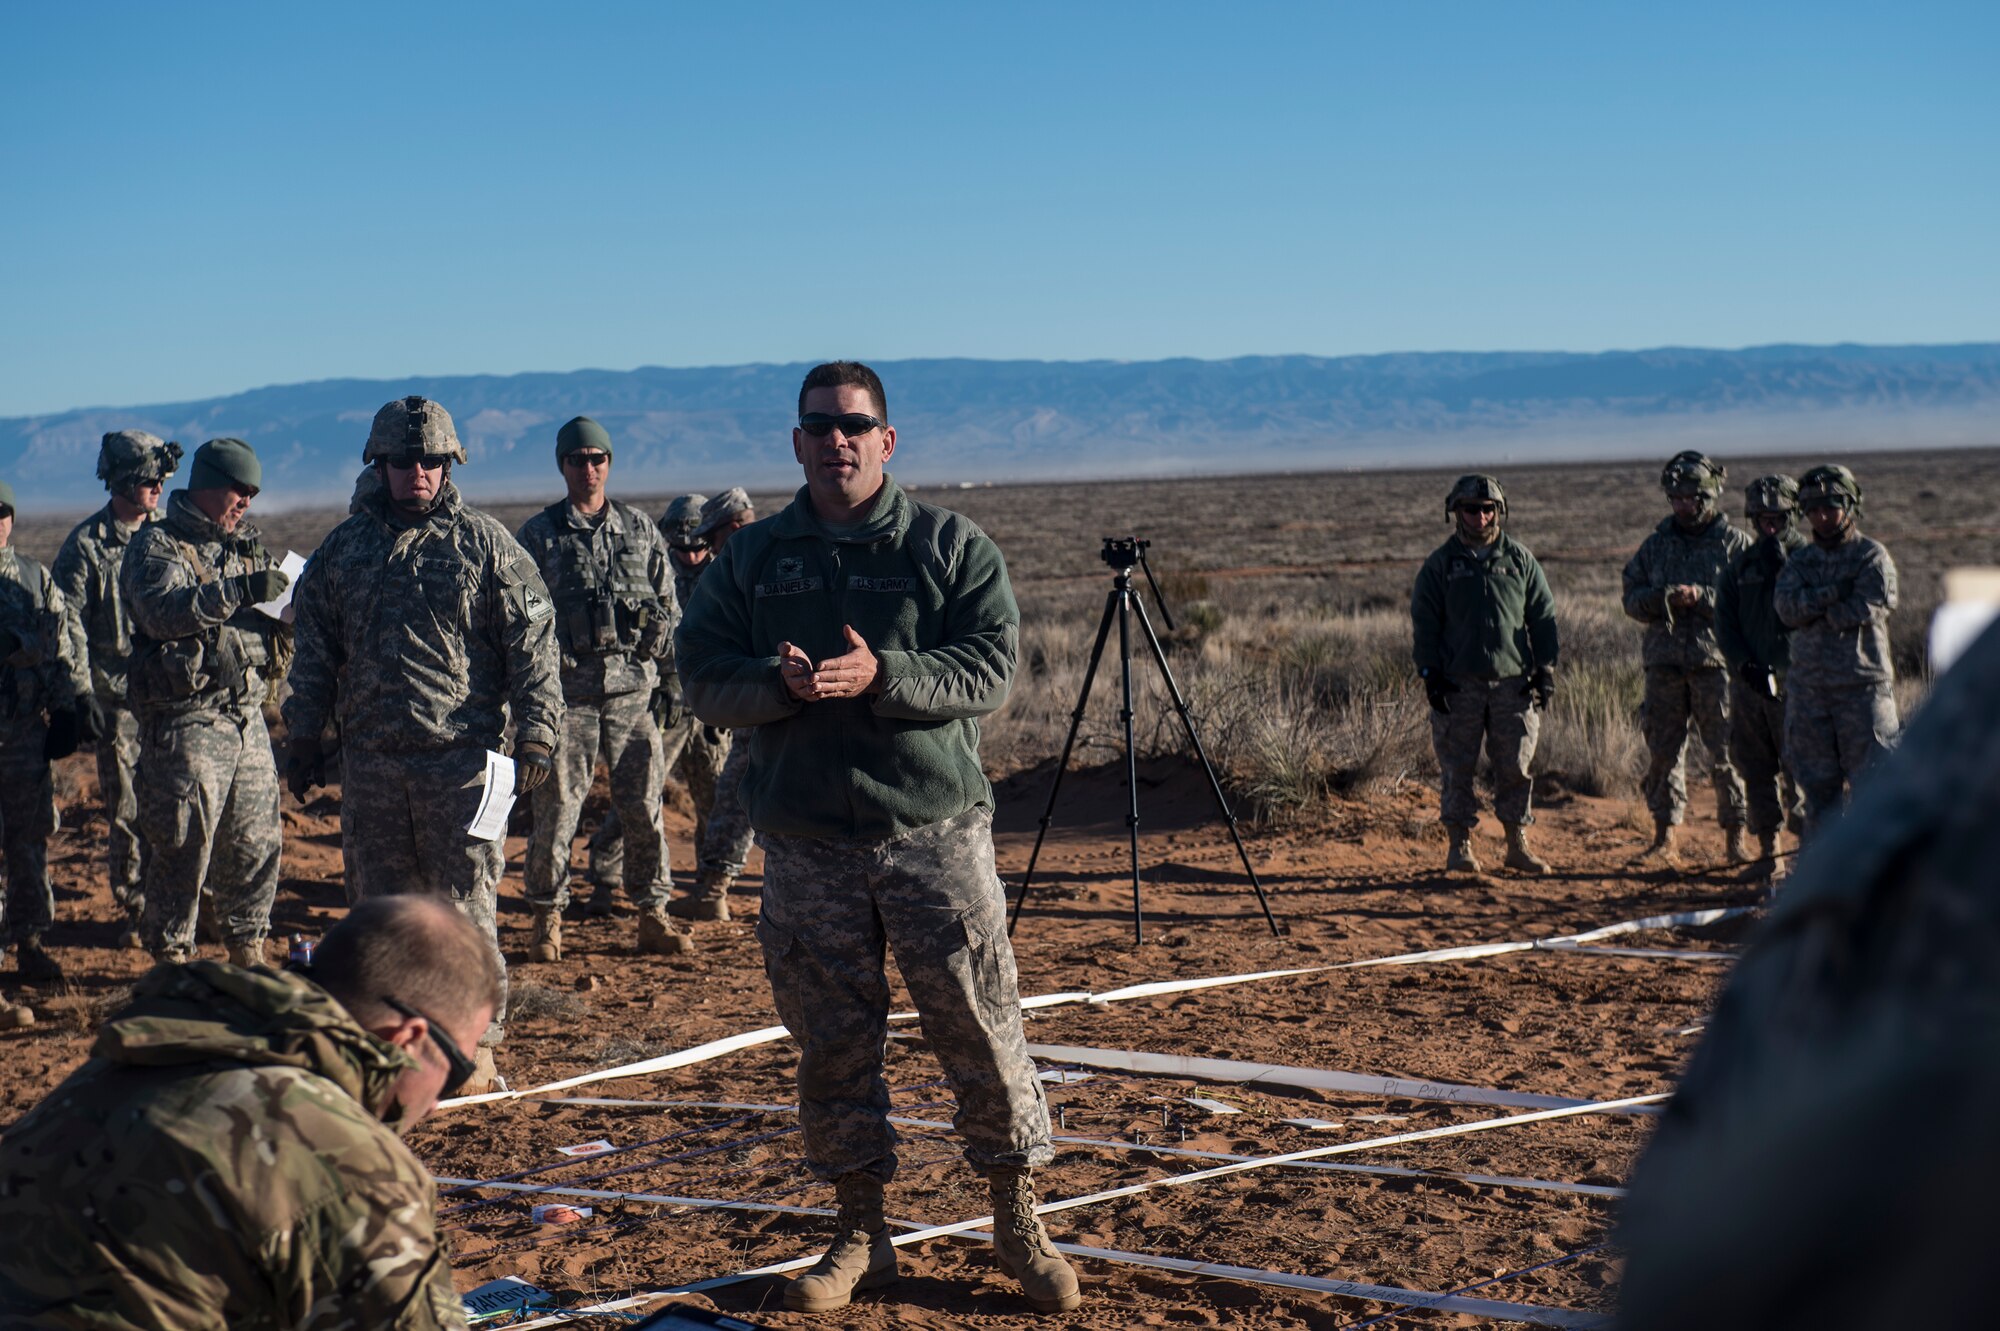 U.S. Army Col. Chip Daniels, 3rd Brigade Combat Team, 1st Armored Division commander, briefs Soldiers and U.S. Air Force Airmen prior to beginning a rehearsal for exercise Iron Focus, Feb. 4, 2016, at the Oro Grande Training Complex at Fort Bliss, Texas. The combined forces worked together to get a better understanding of each other’s capabilities and to prepare for future deployments. (U.S. Air Force photo by Senior Airman Olivia Dominique/Released)